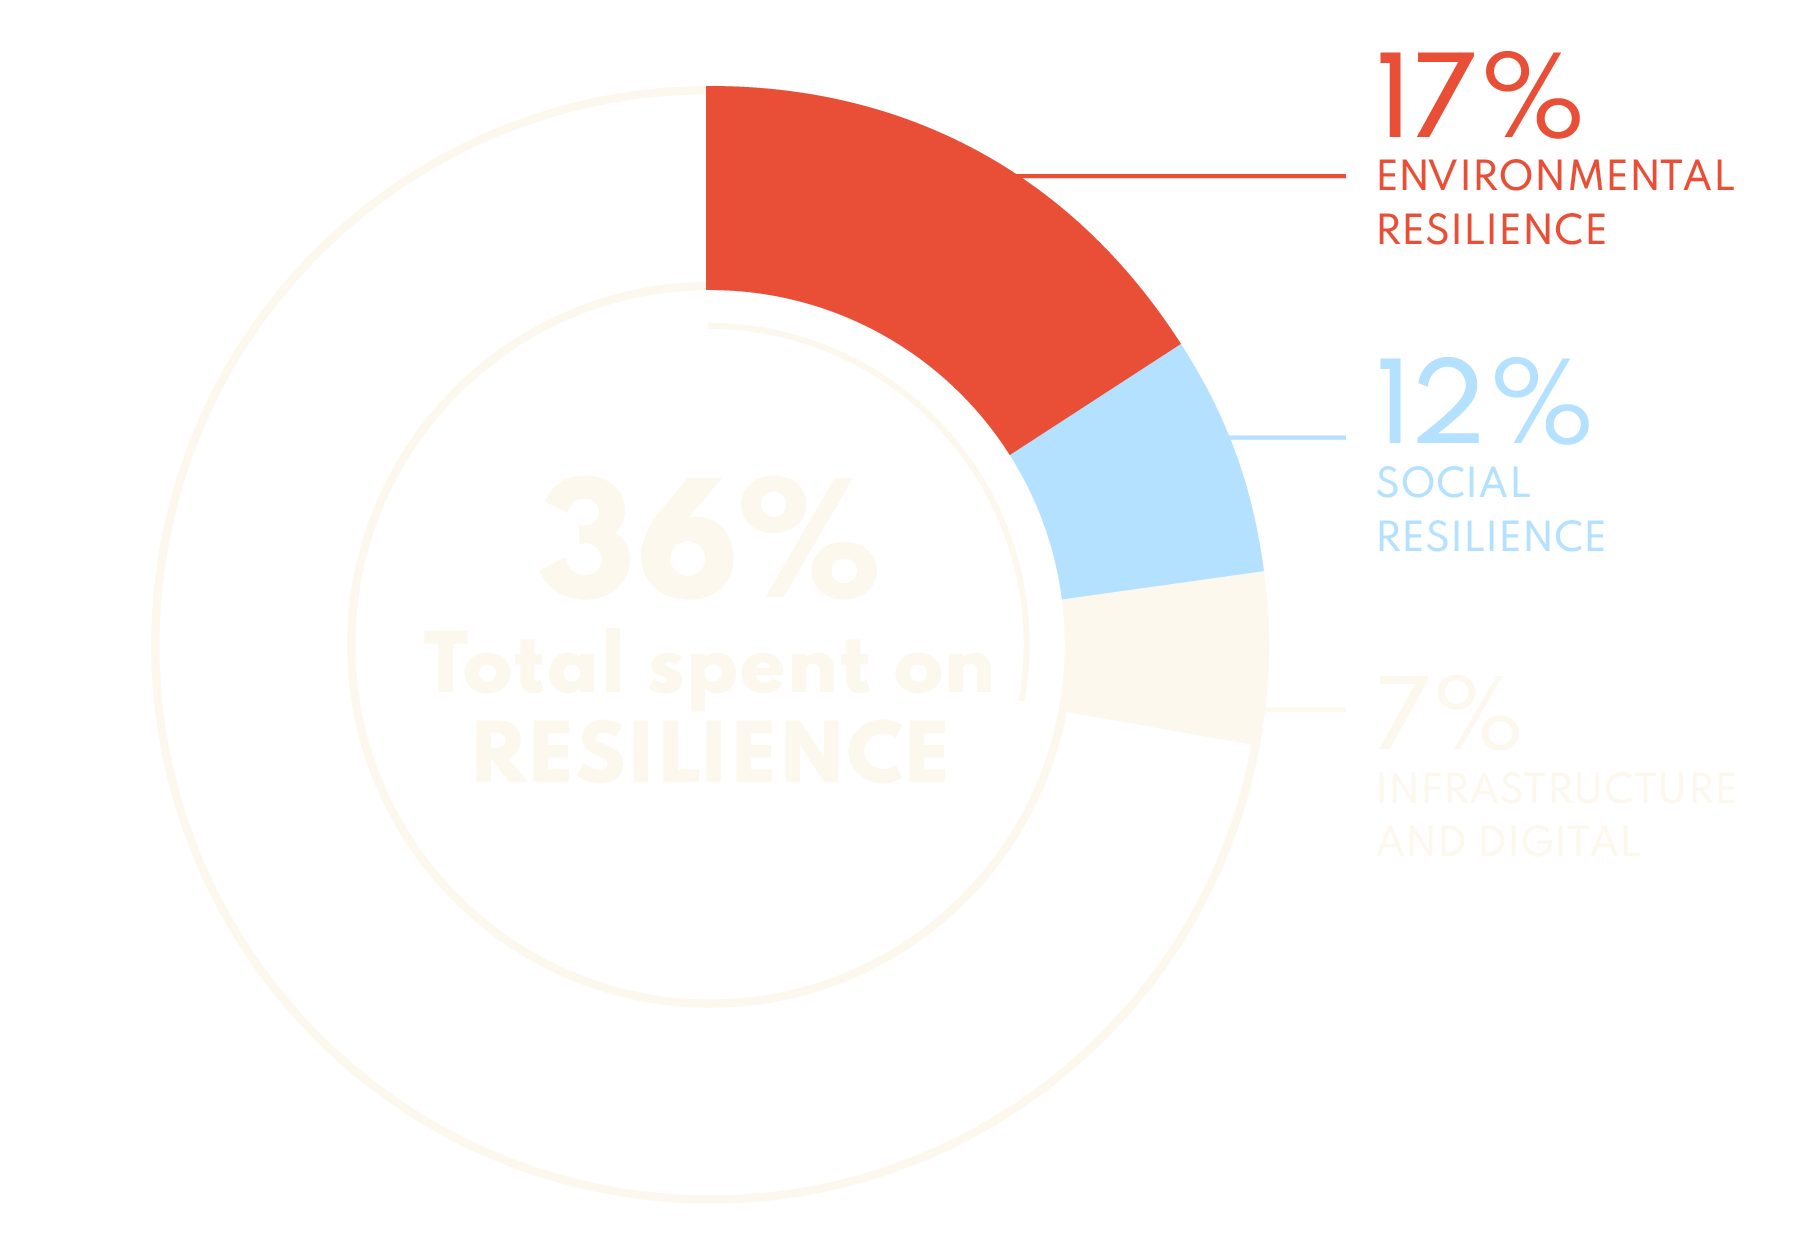 Total: 36% spent on resilience